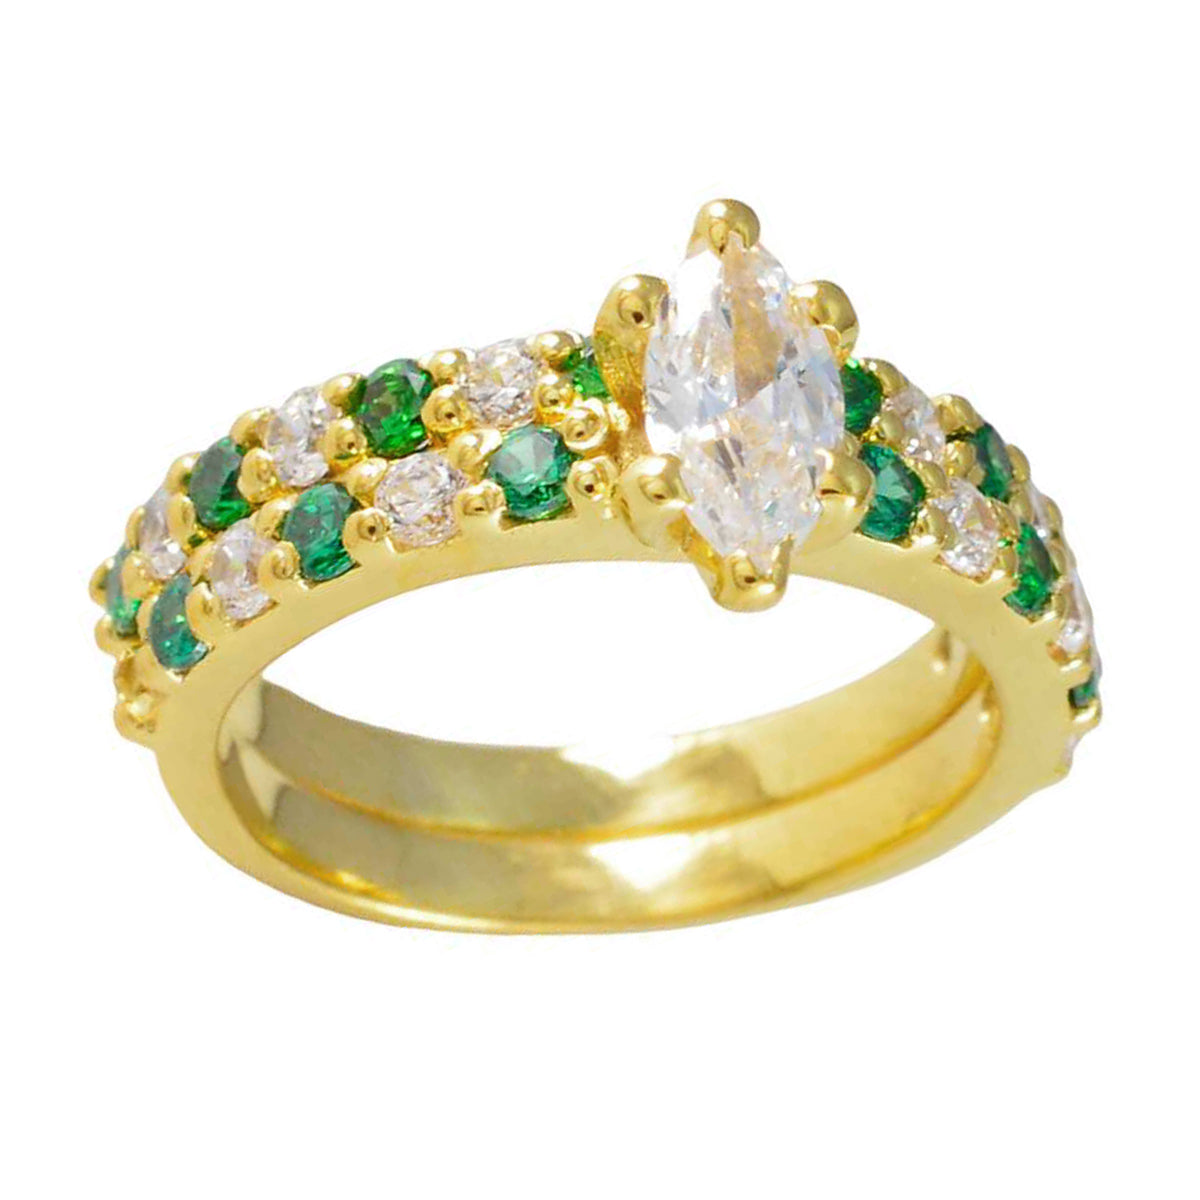 Riyo Excellent Silver Ring With Yellow Gold Plating Emerald CZ Stone Marquise Shape Prong Setting  Jewelry Wedding Ring